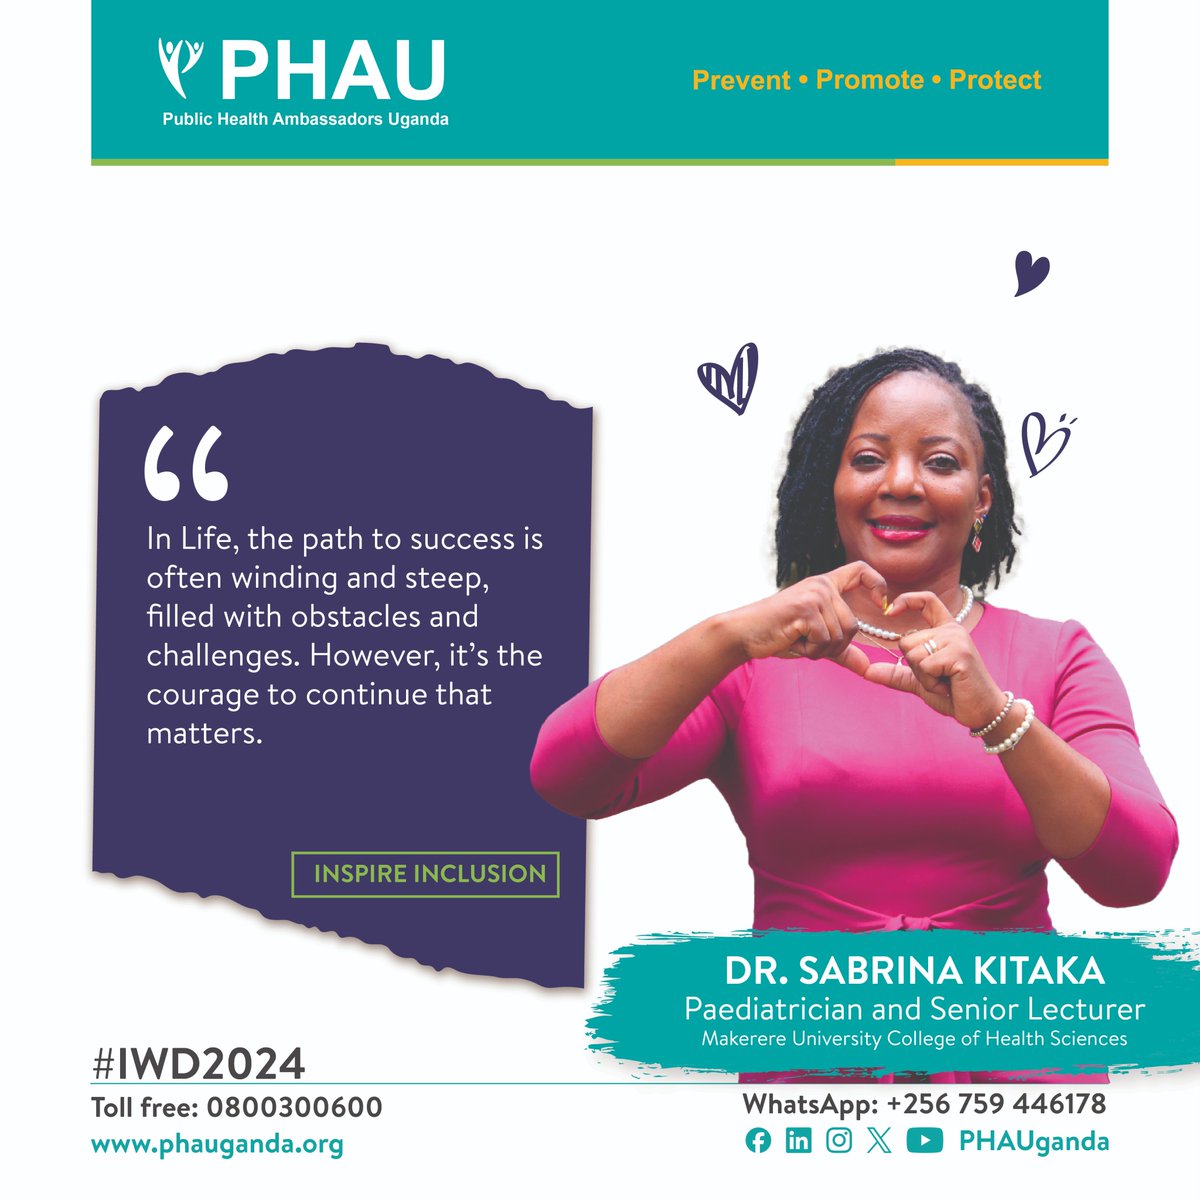 As we #InspireInclusion to forge a better world, our WCW today, is one of our Board Members @SabrinaKitaka with a very motivational message for the Women's Month. #PHAUCARES #IWD2024 #WomenInLeadership #WomenEmpowerment